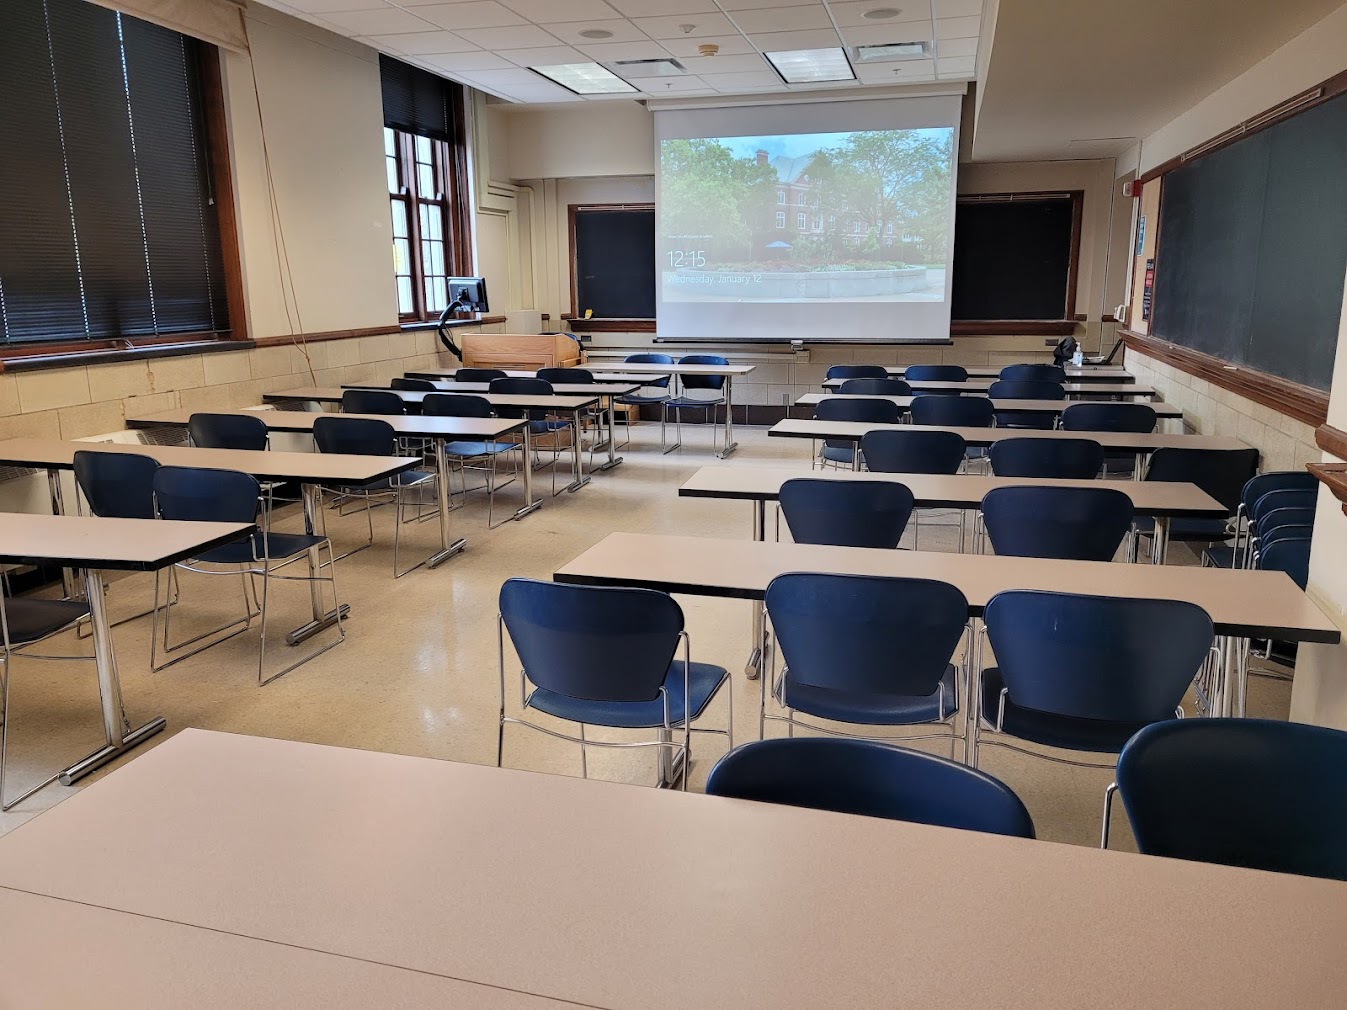 A view of the classroom with moveable tables and chairs, chalkboard, and instructor table in front.